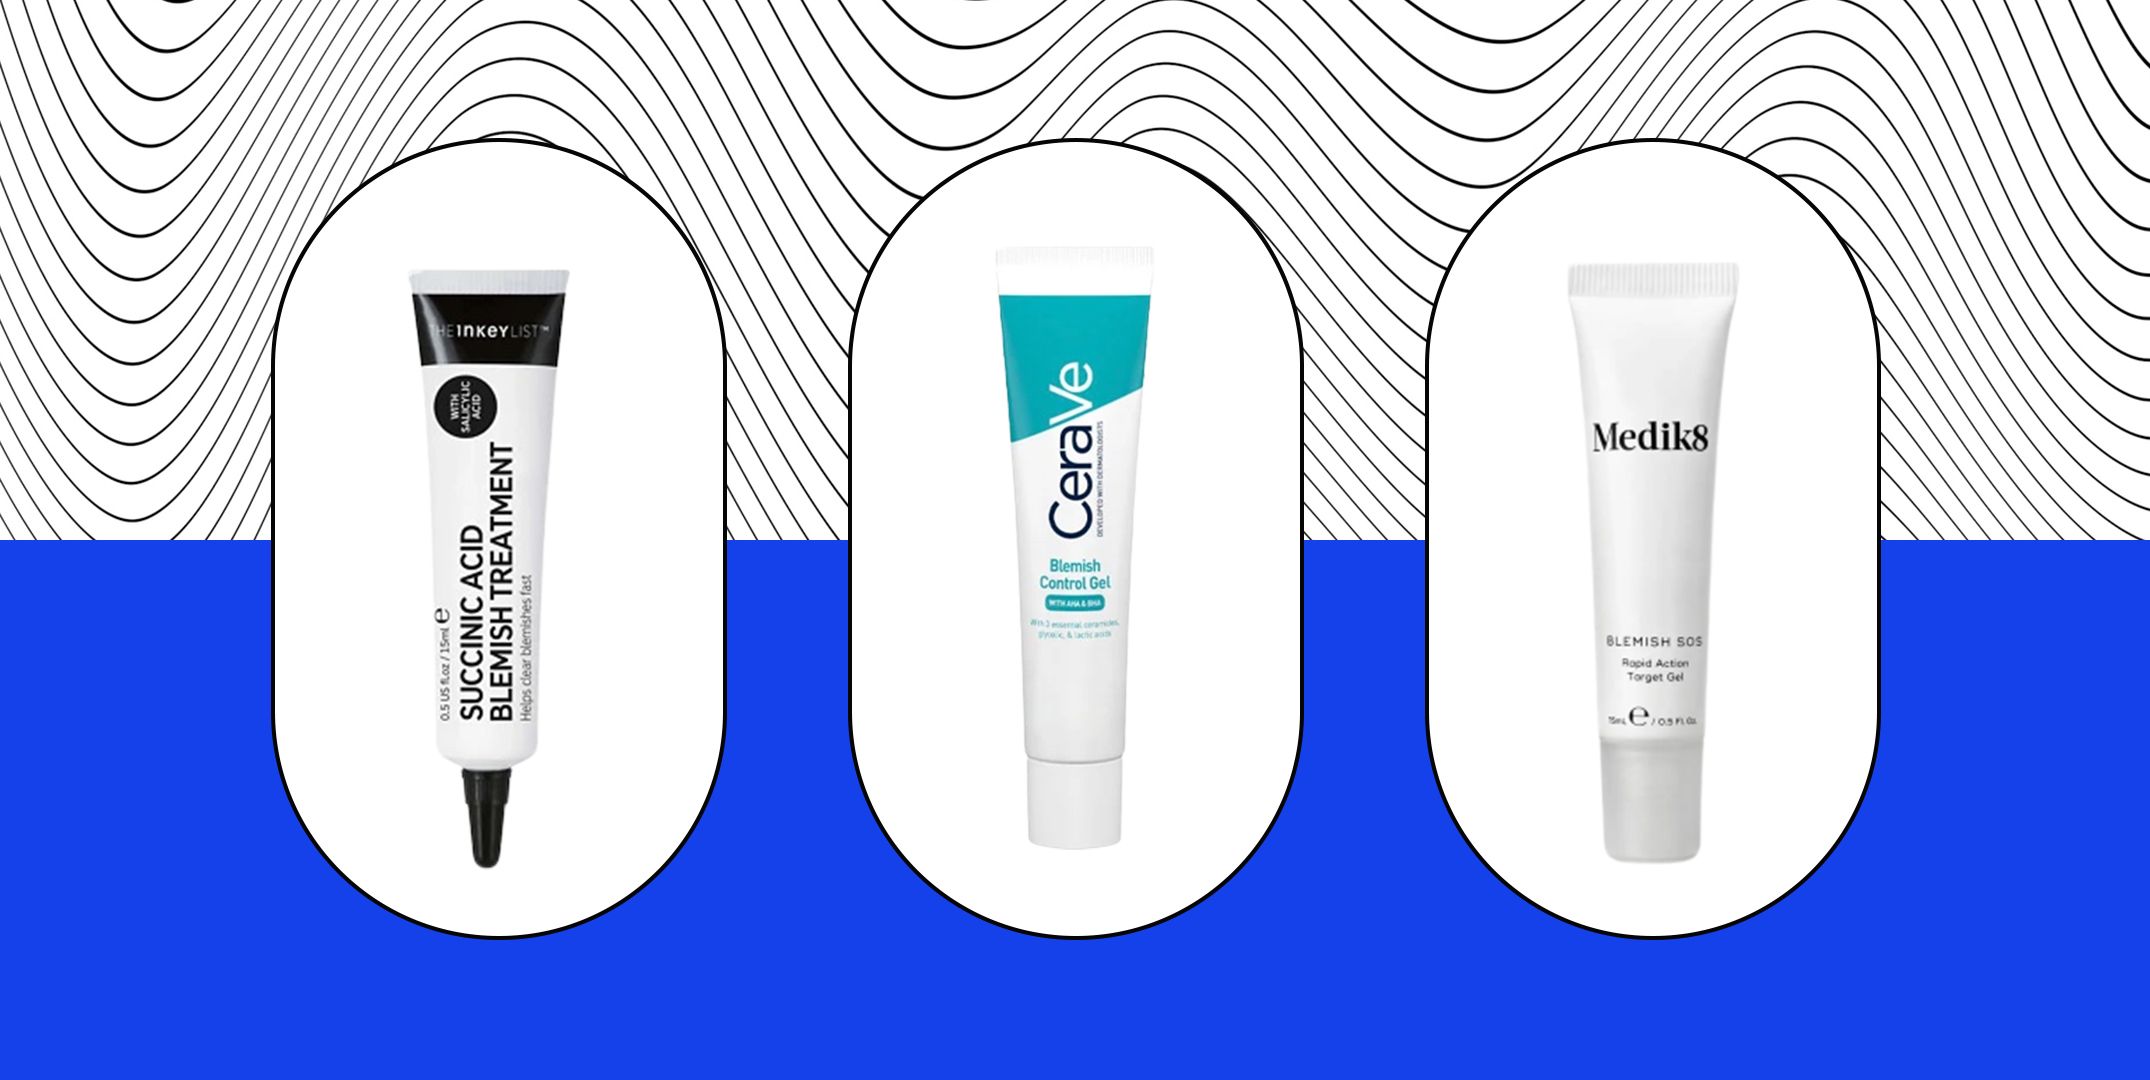 These are the best blemish busting spot treatments on the market